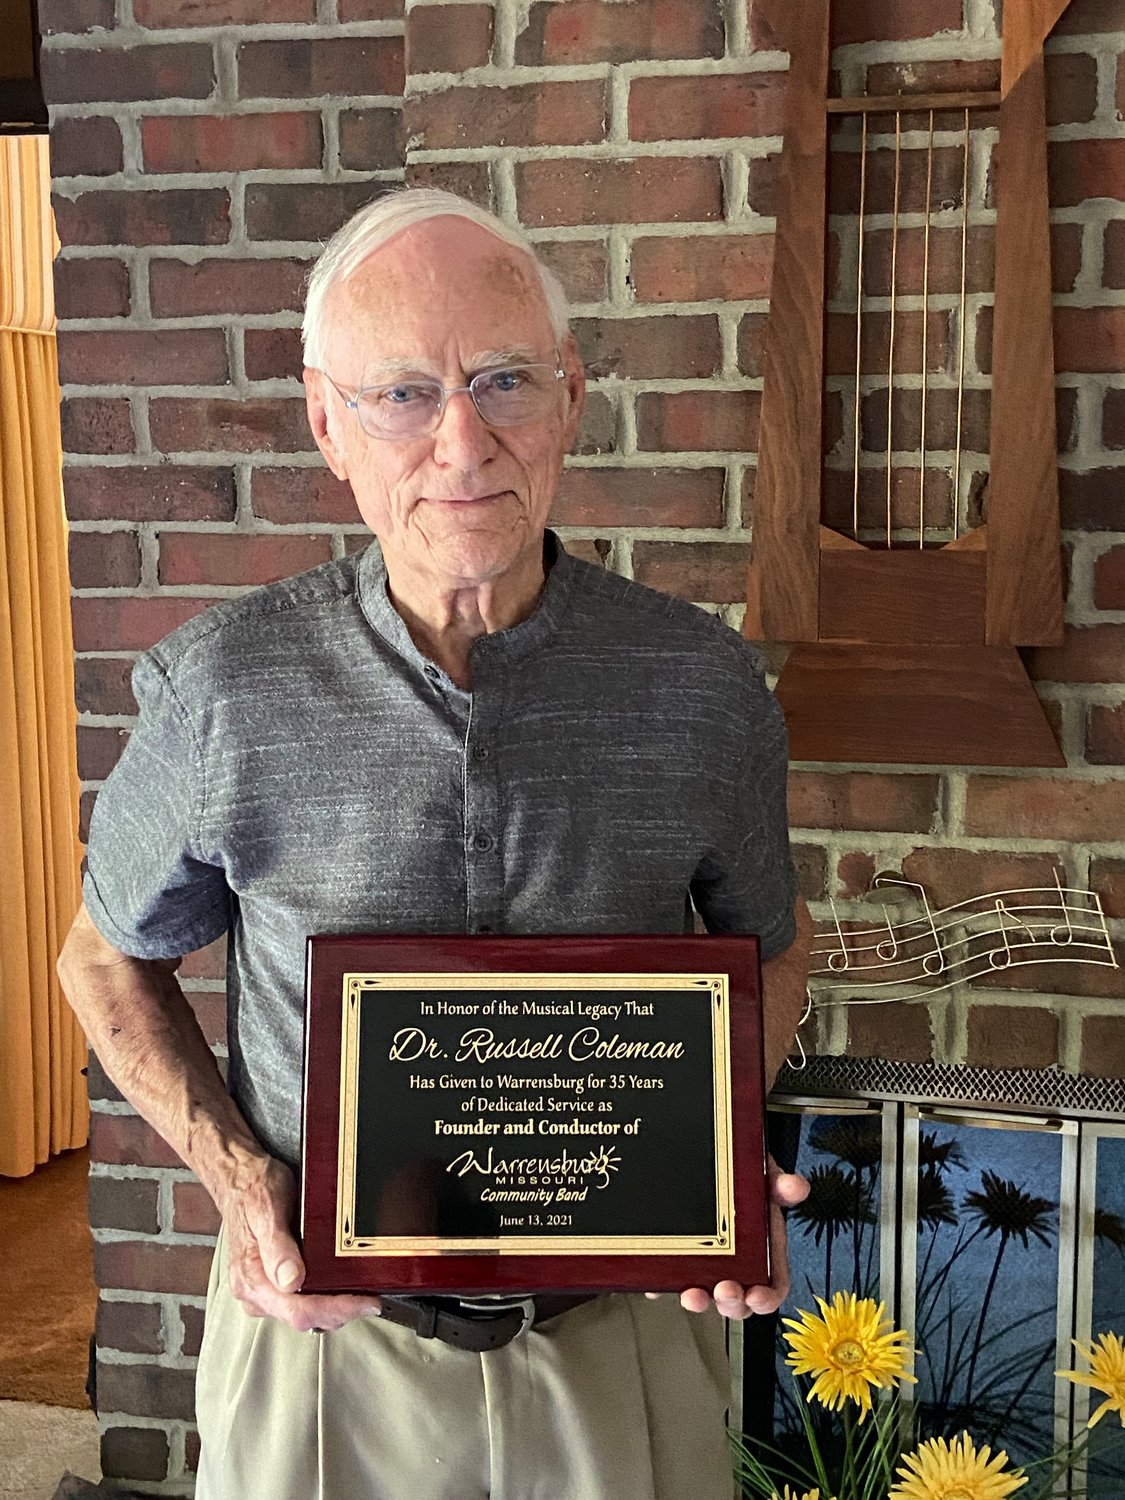 Russell Coleman holds a plaque honoring his 35 years of service as founder and conductor of the Warrensburg Community Band at a celebration June 13. 